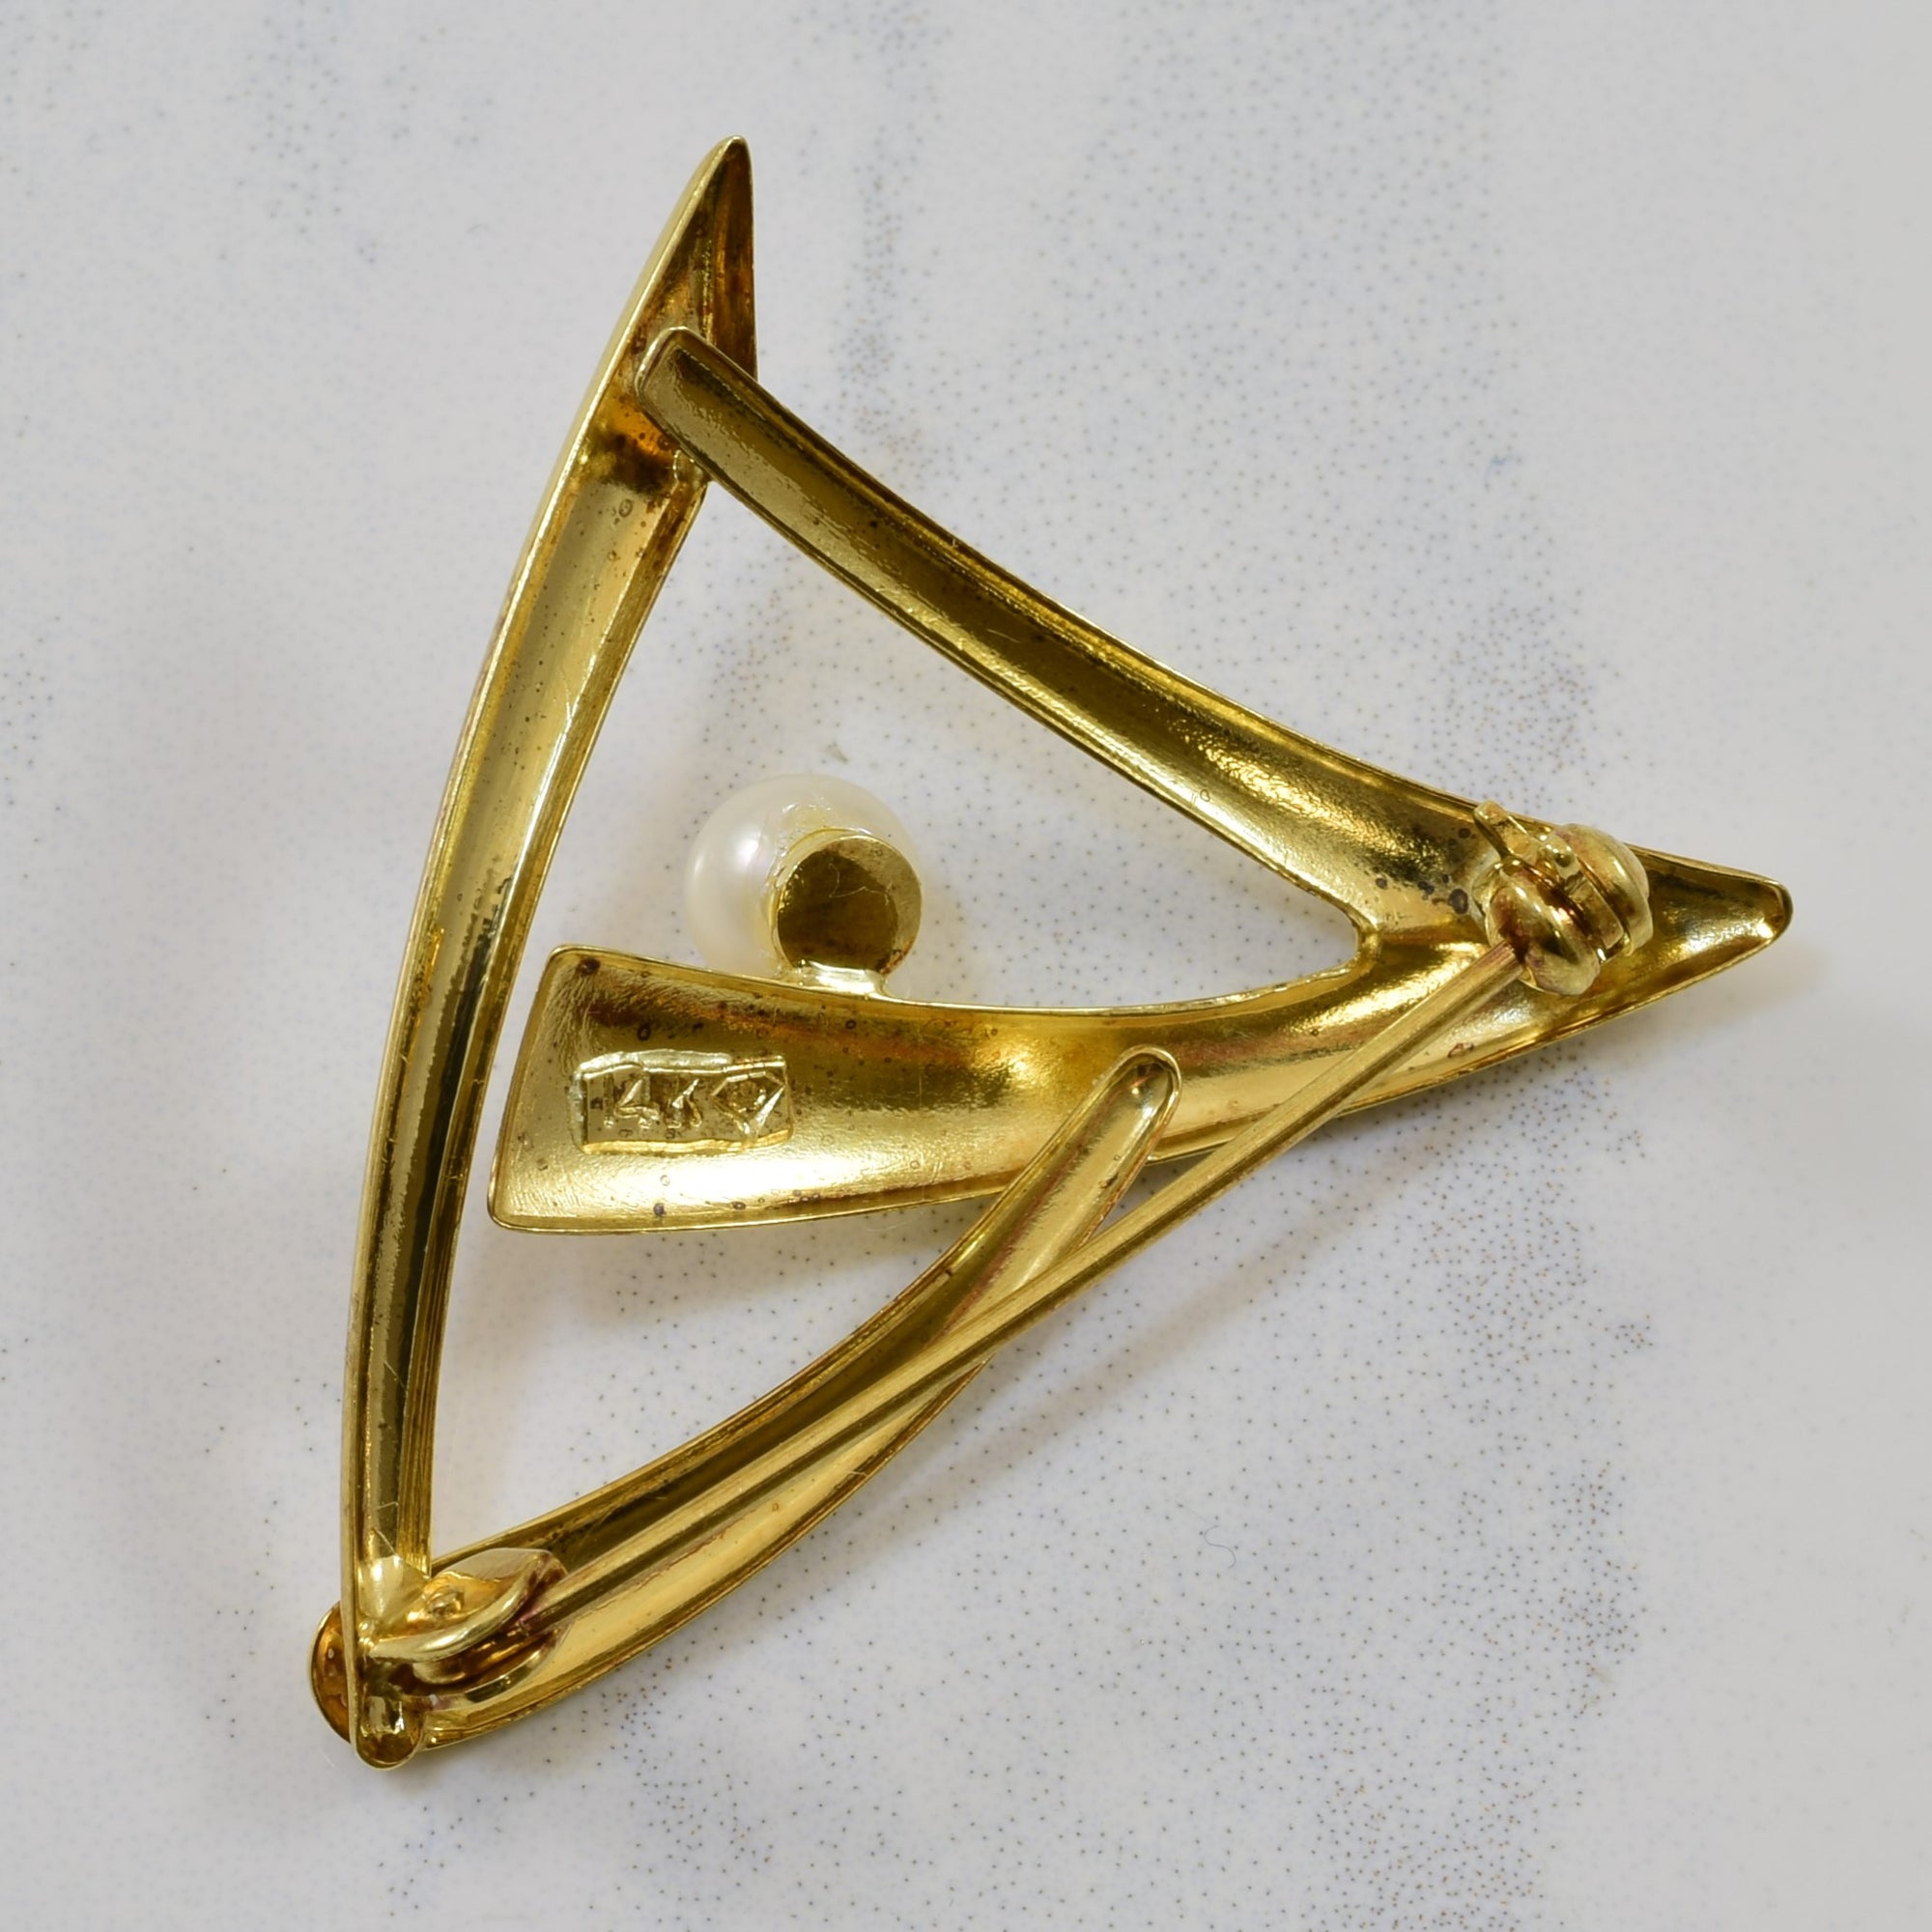 Abstract Pearl Triangle Brooch | 0.90ct |